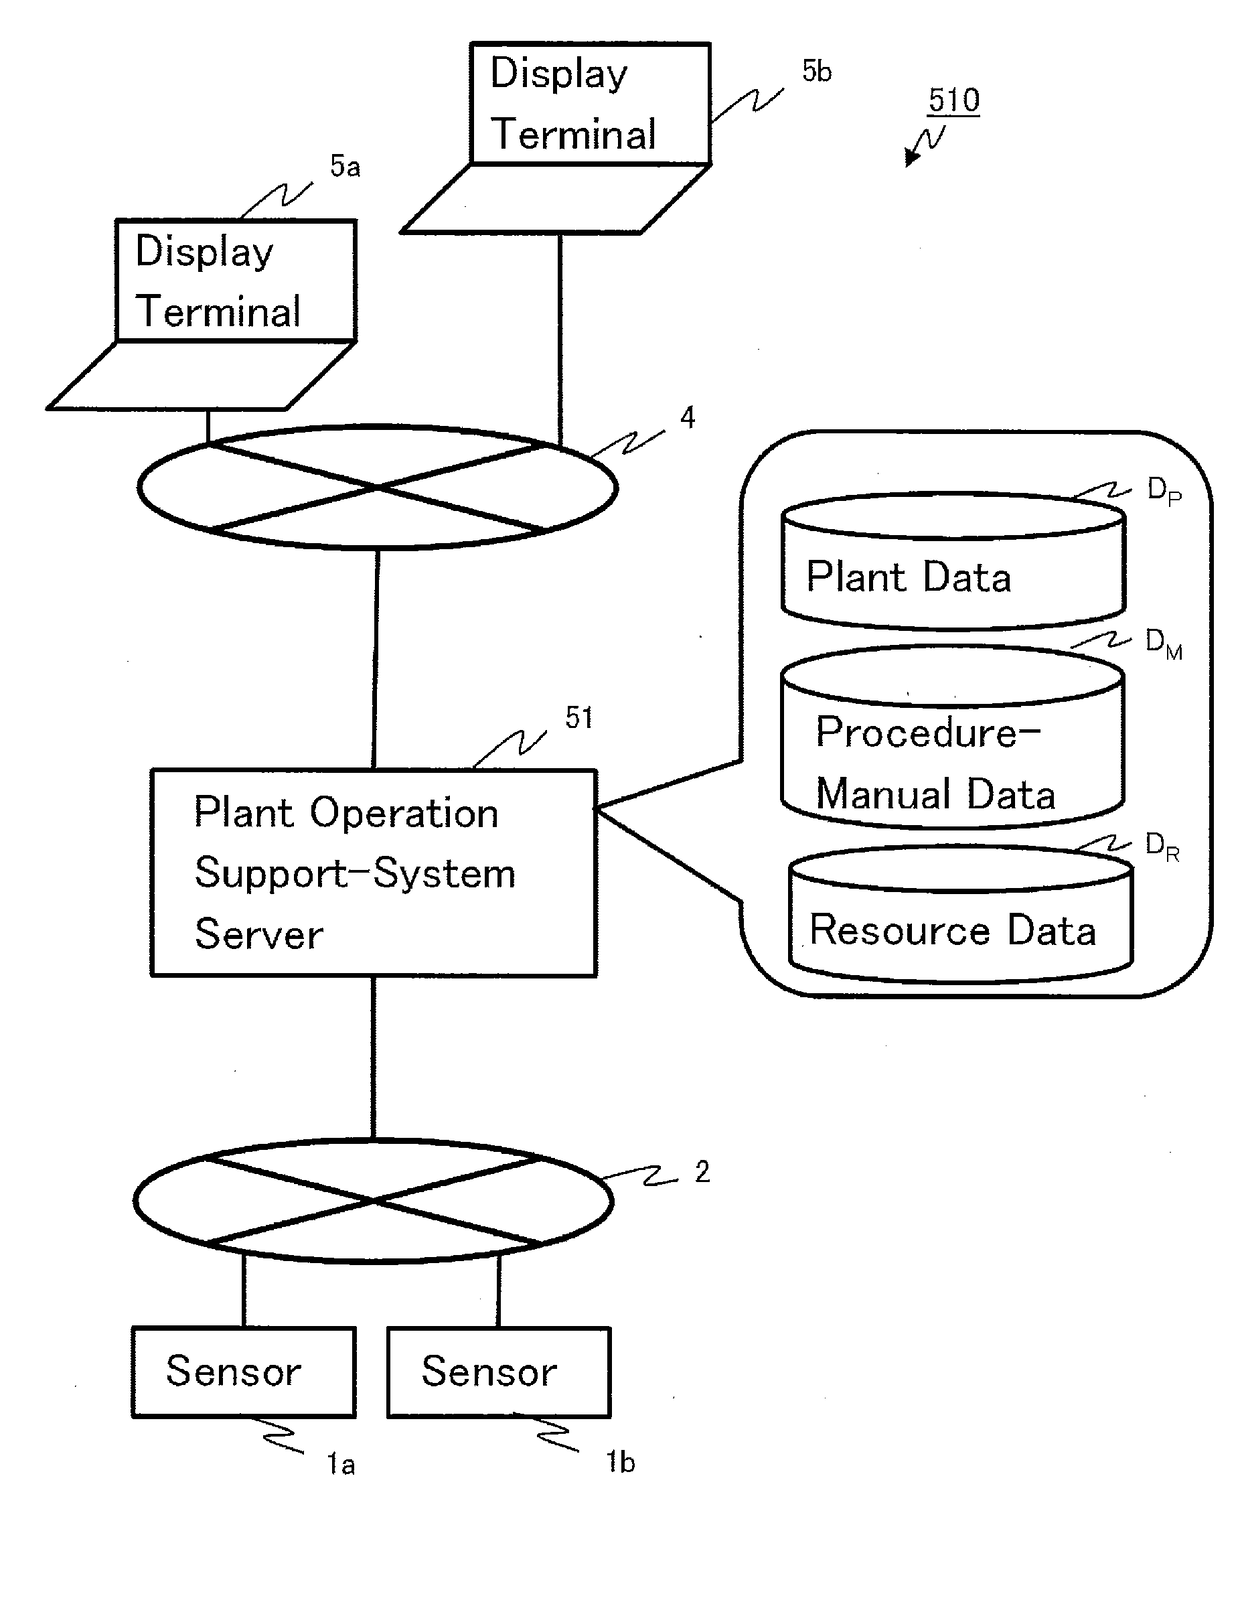 Plant Operation Support-System Server and Plant Operation Support System